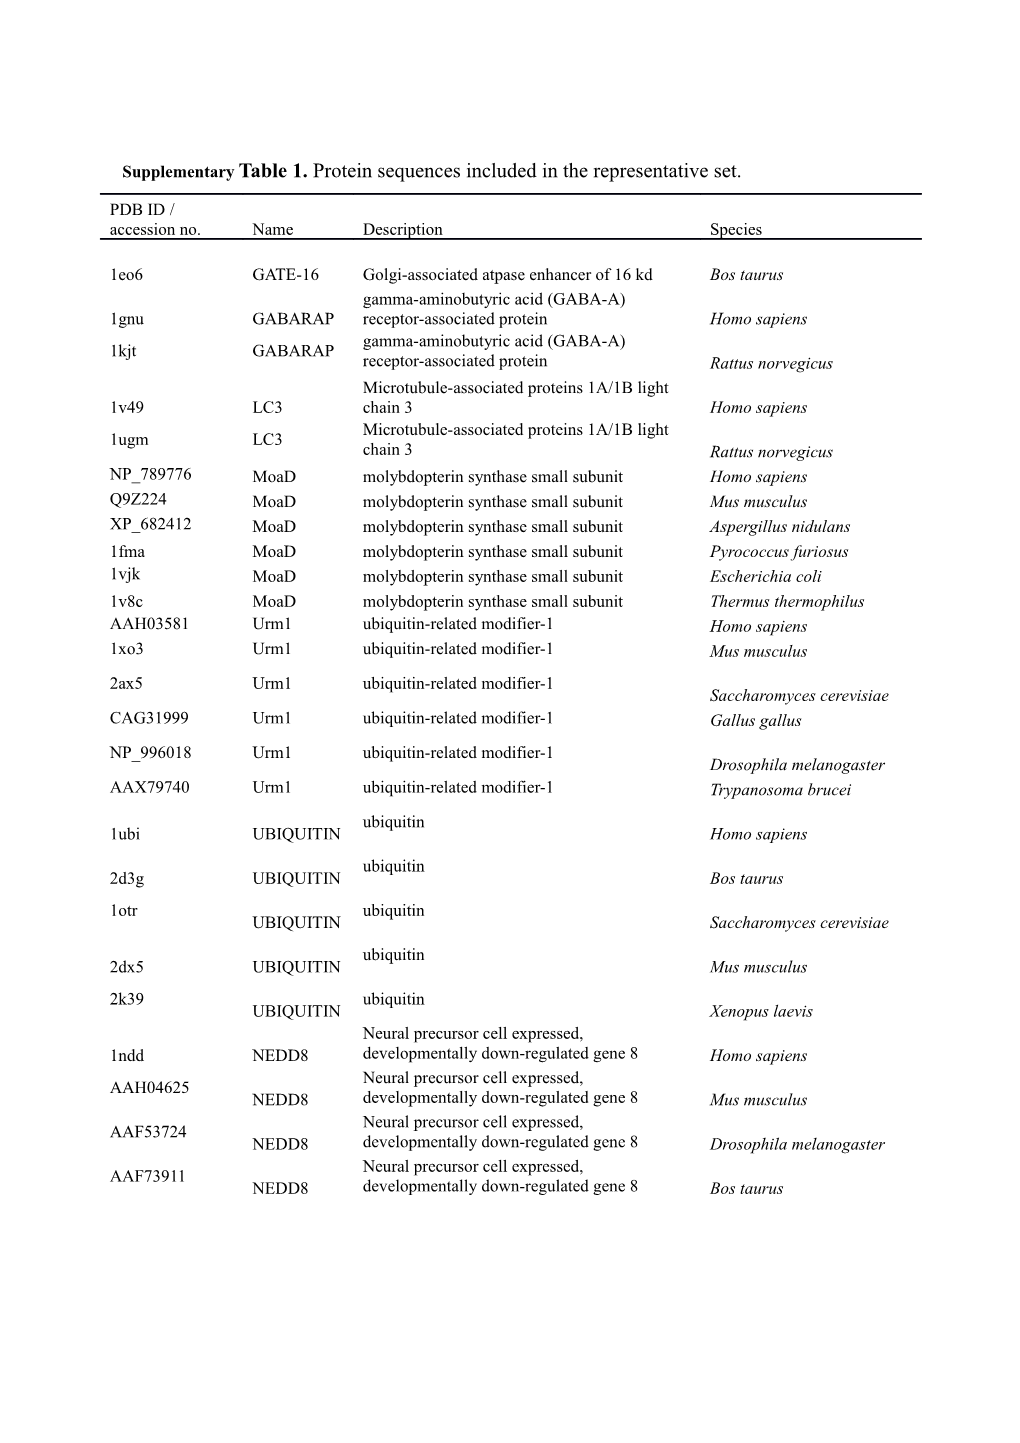 Supplementarytable 1. Protein Sequences Included in the Representative Set